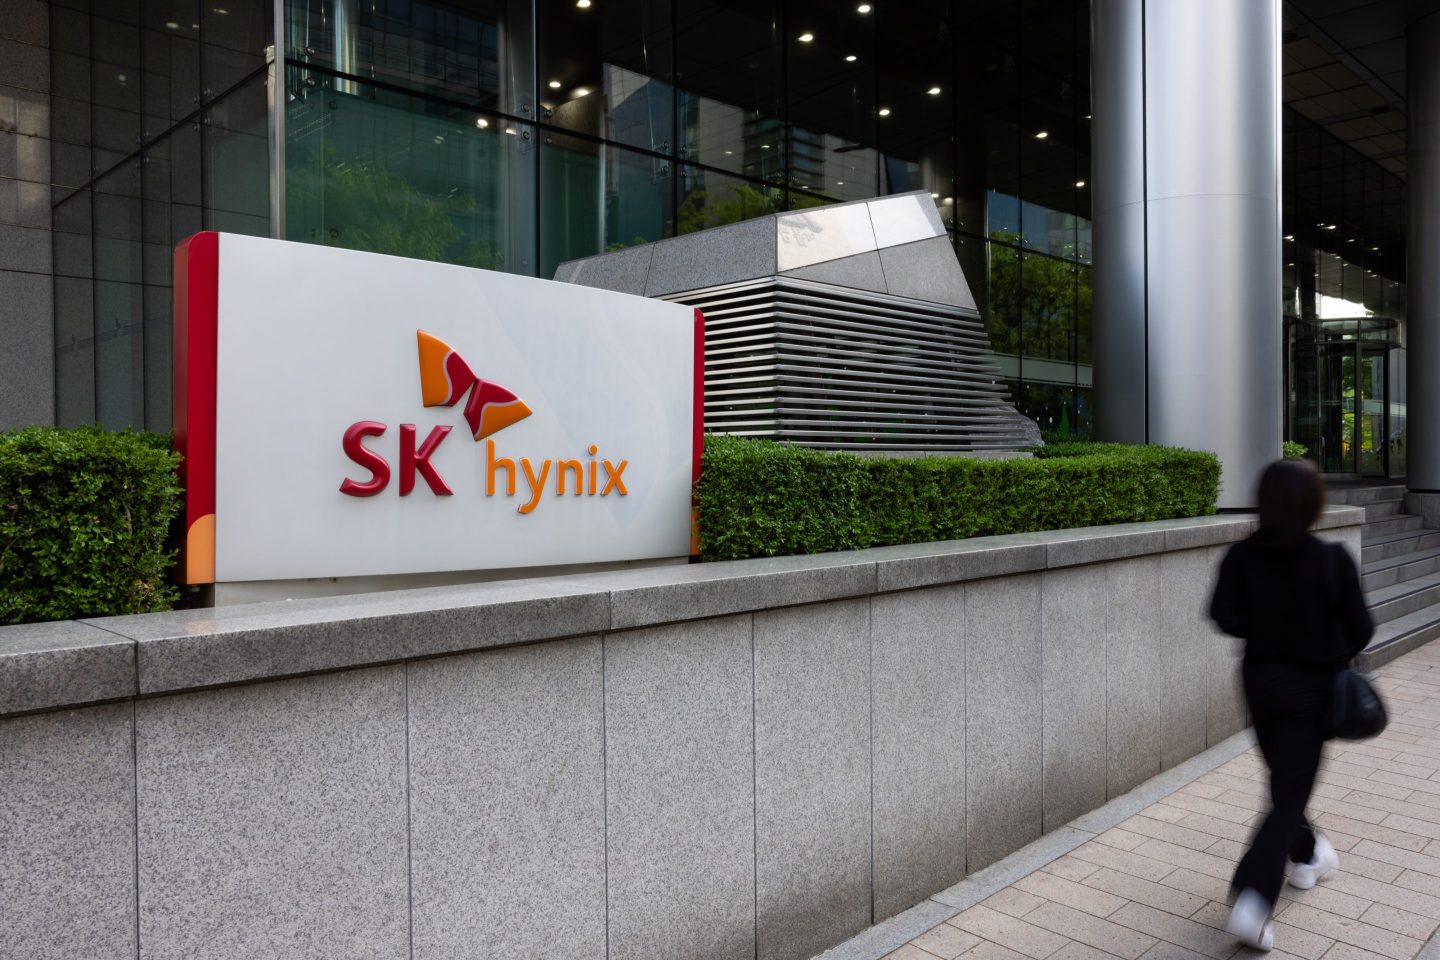 At SK Hynix’s offices in Seongnam, South Korea.